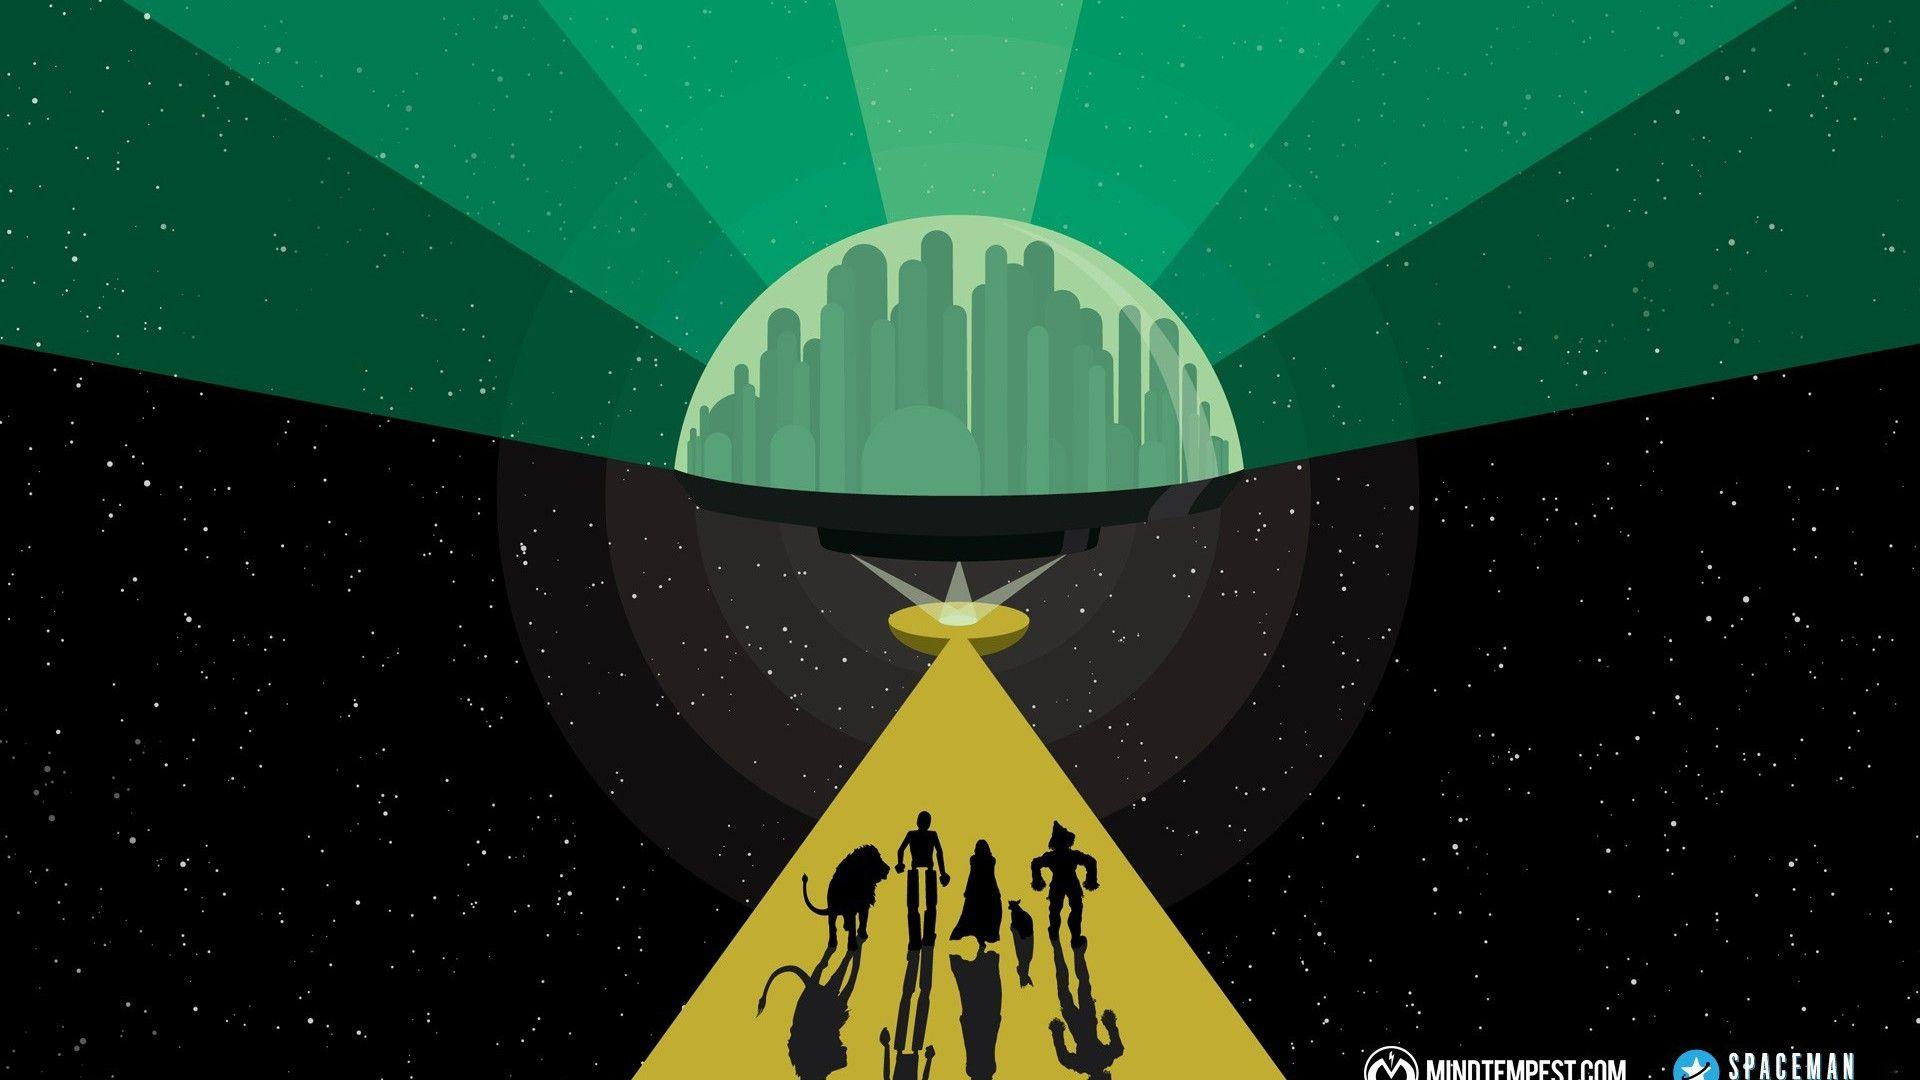 Silhouettes paths wizard of oz artwork cities wallpapers